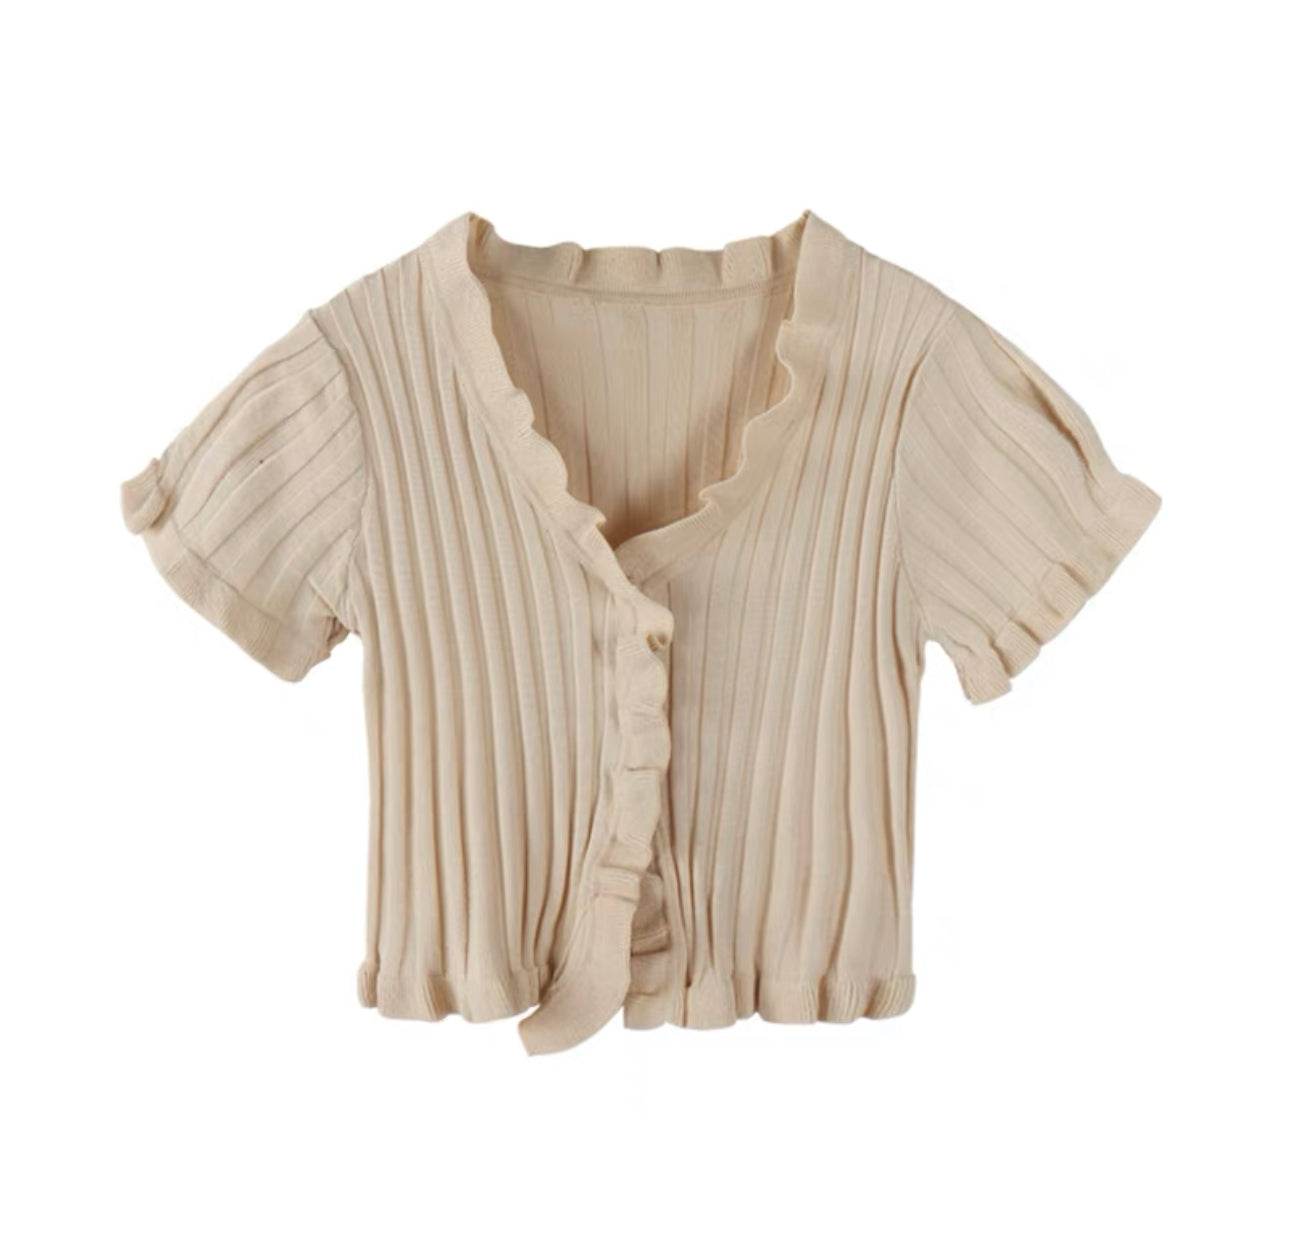 Waved Button-up Knit Top - Cream